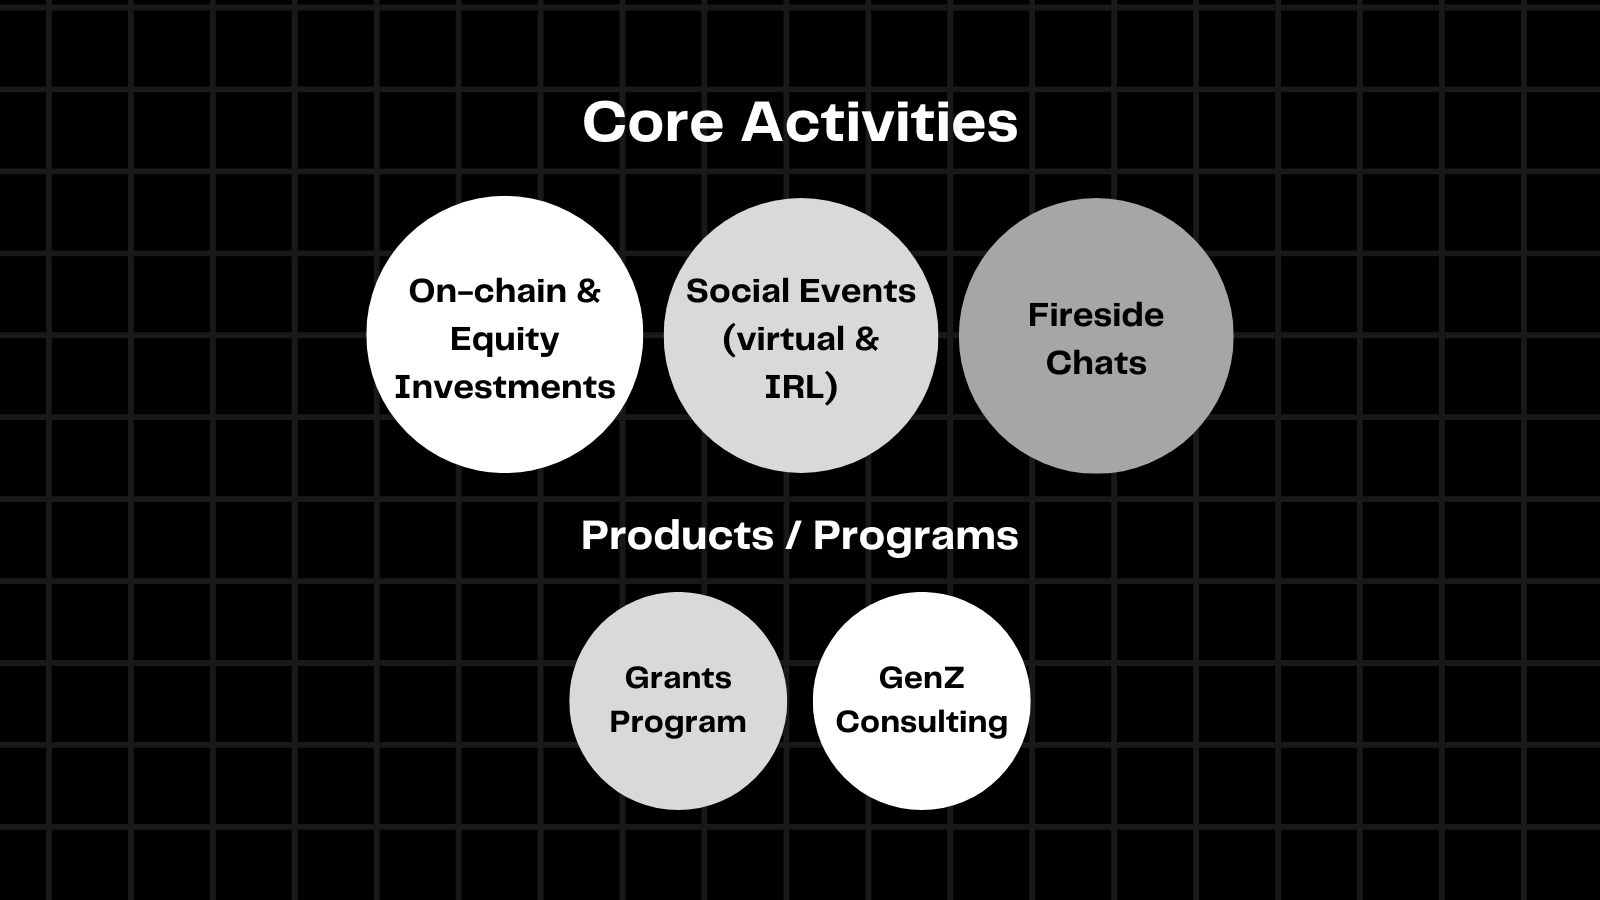 The Symmetrical's Core Activities and Products / Programs